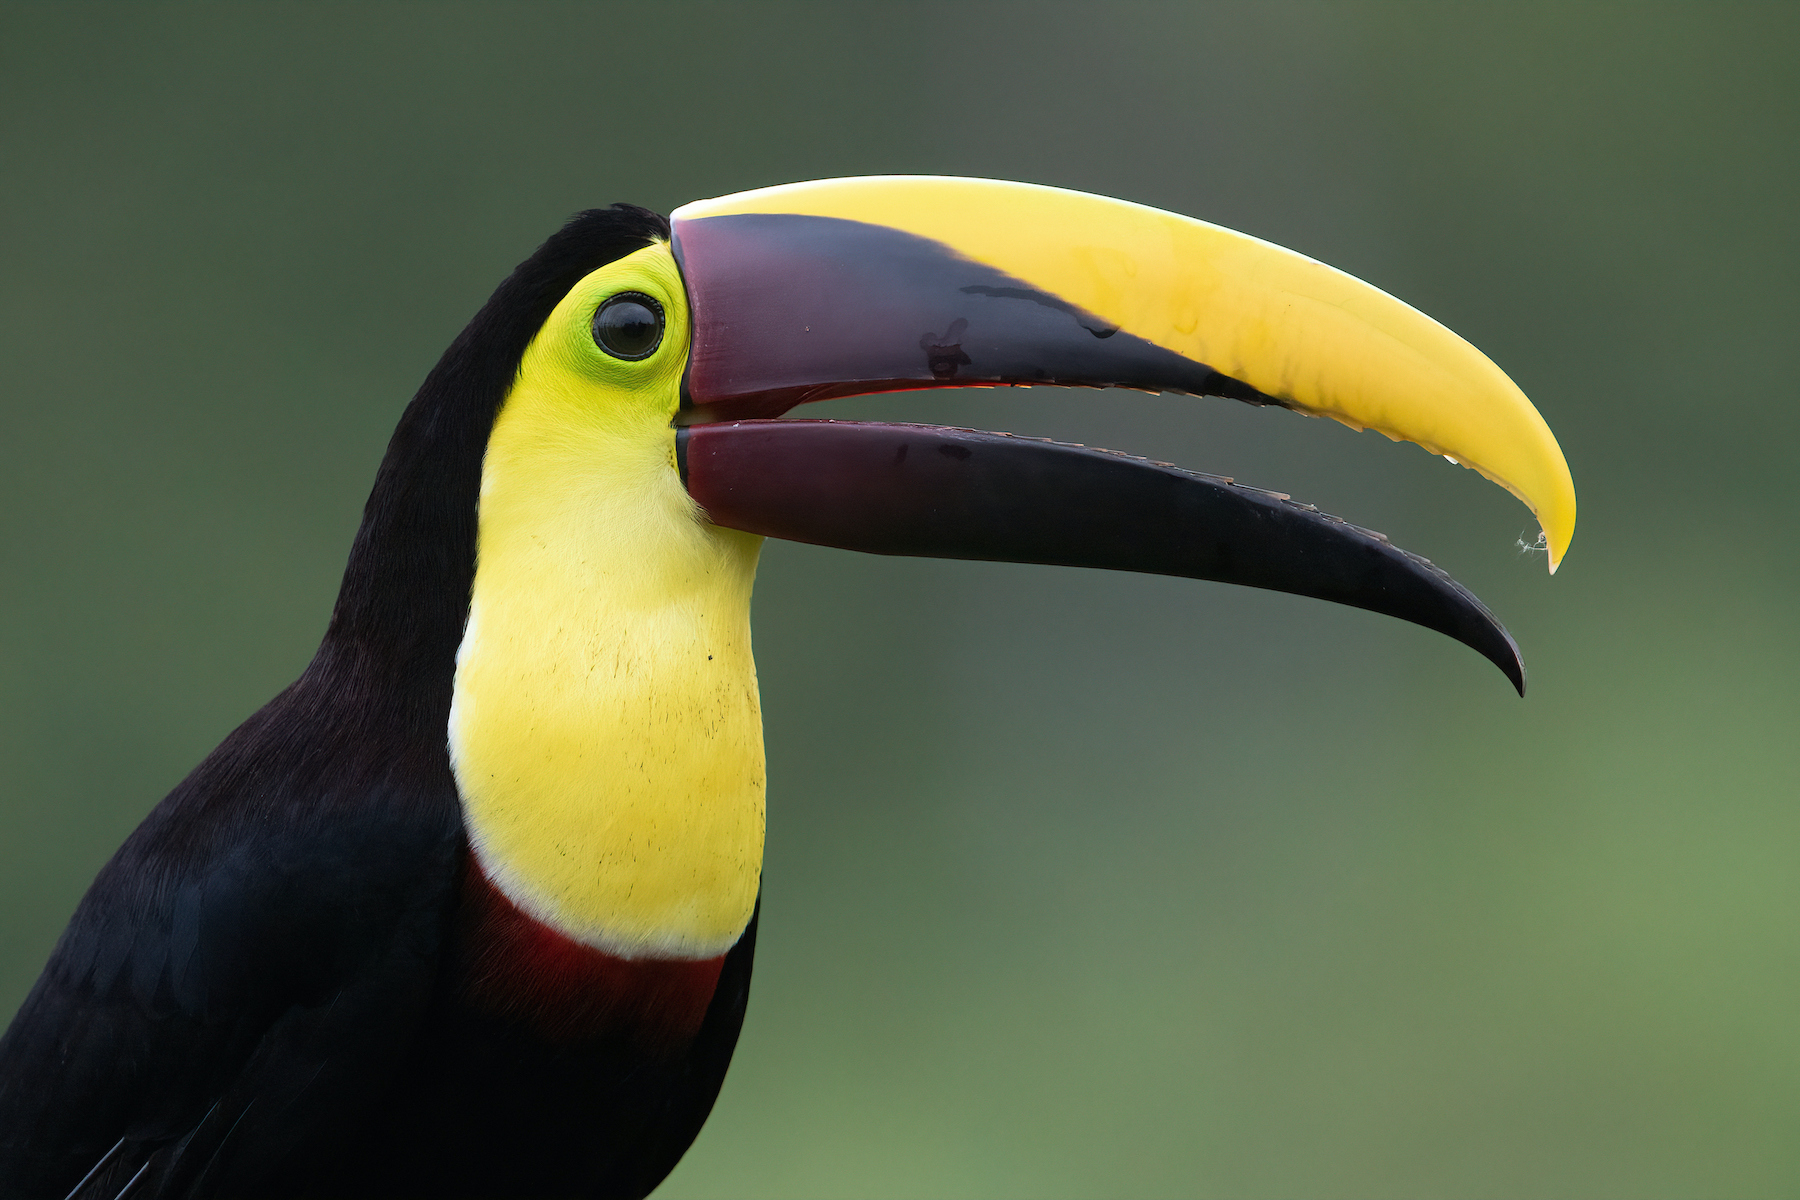 Smile! Close up of a Black-mandibled Toucan